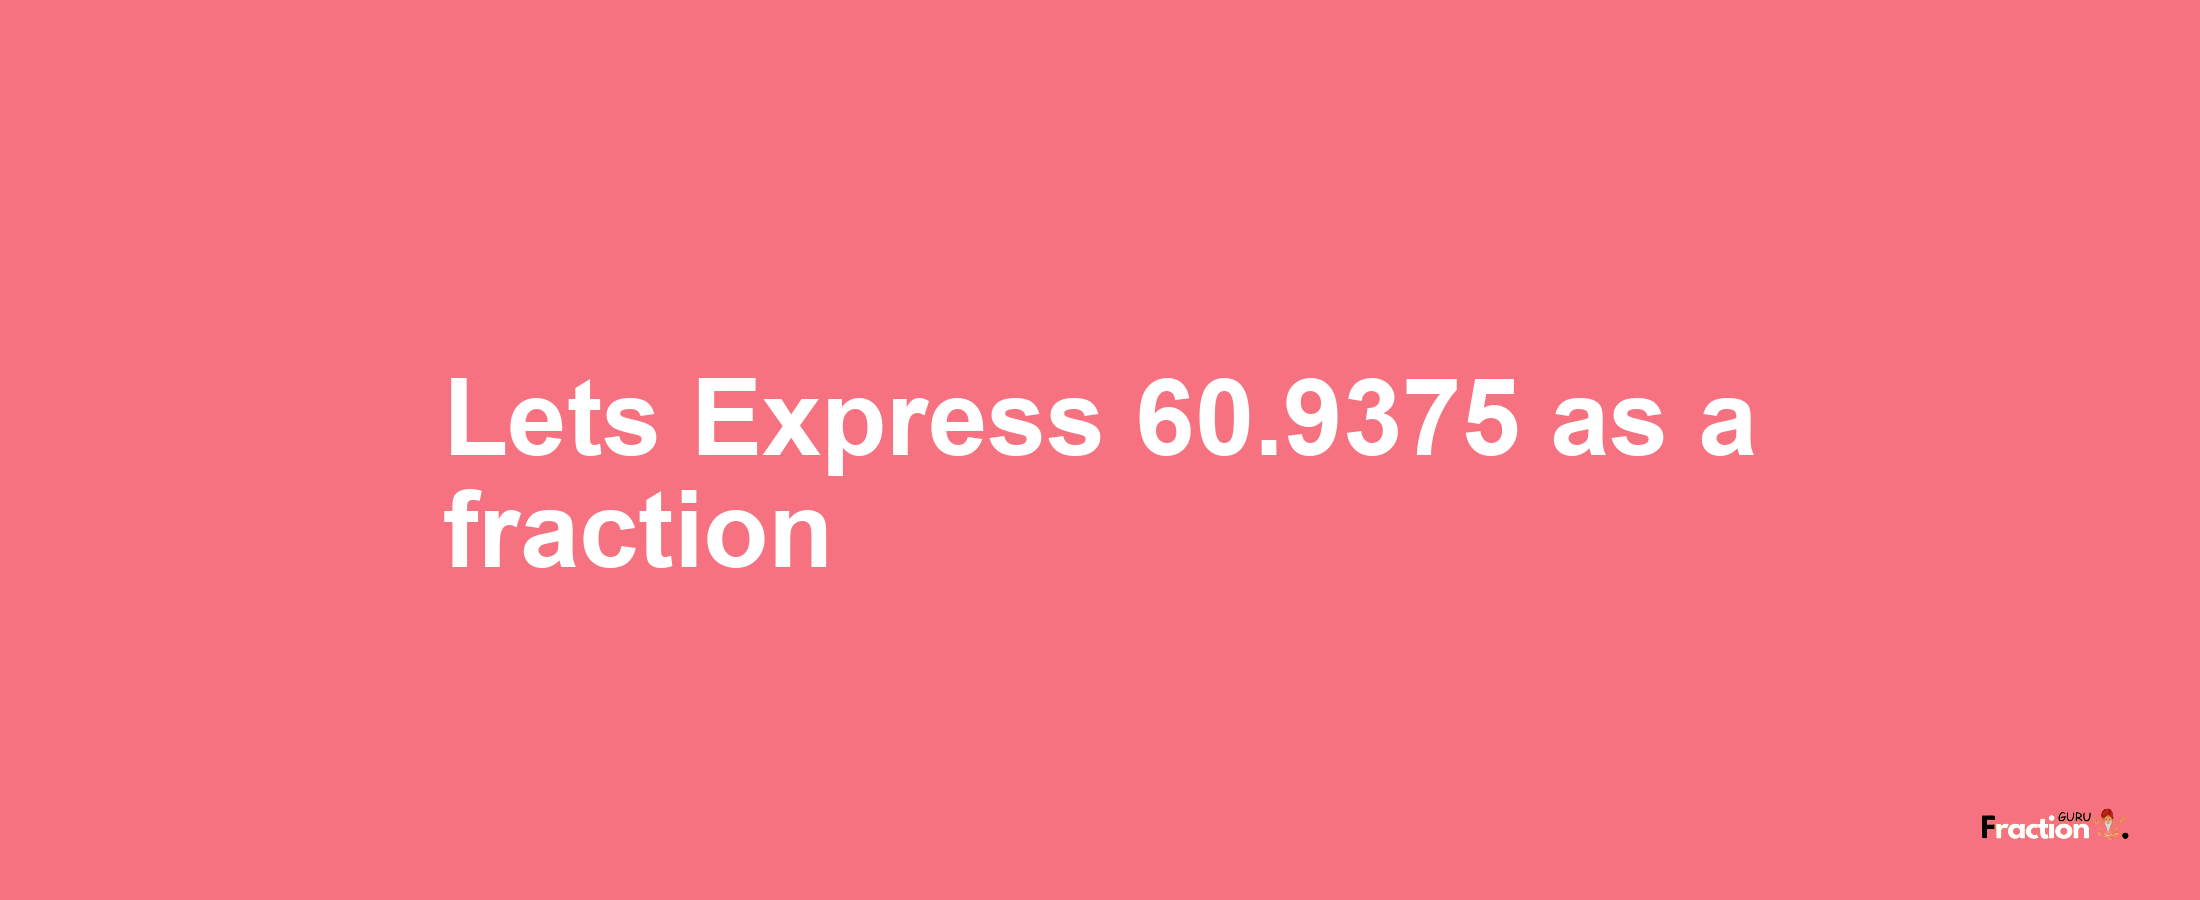 Lets Express 60.9375 as afraction